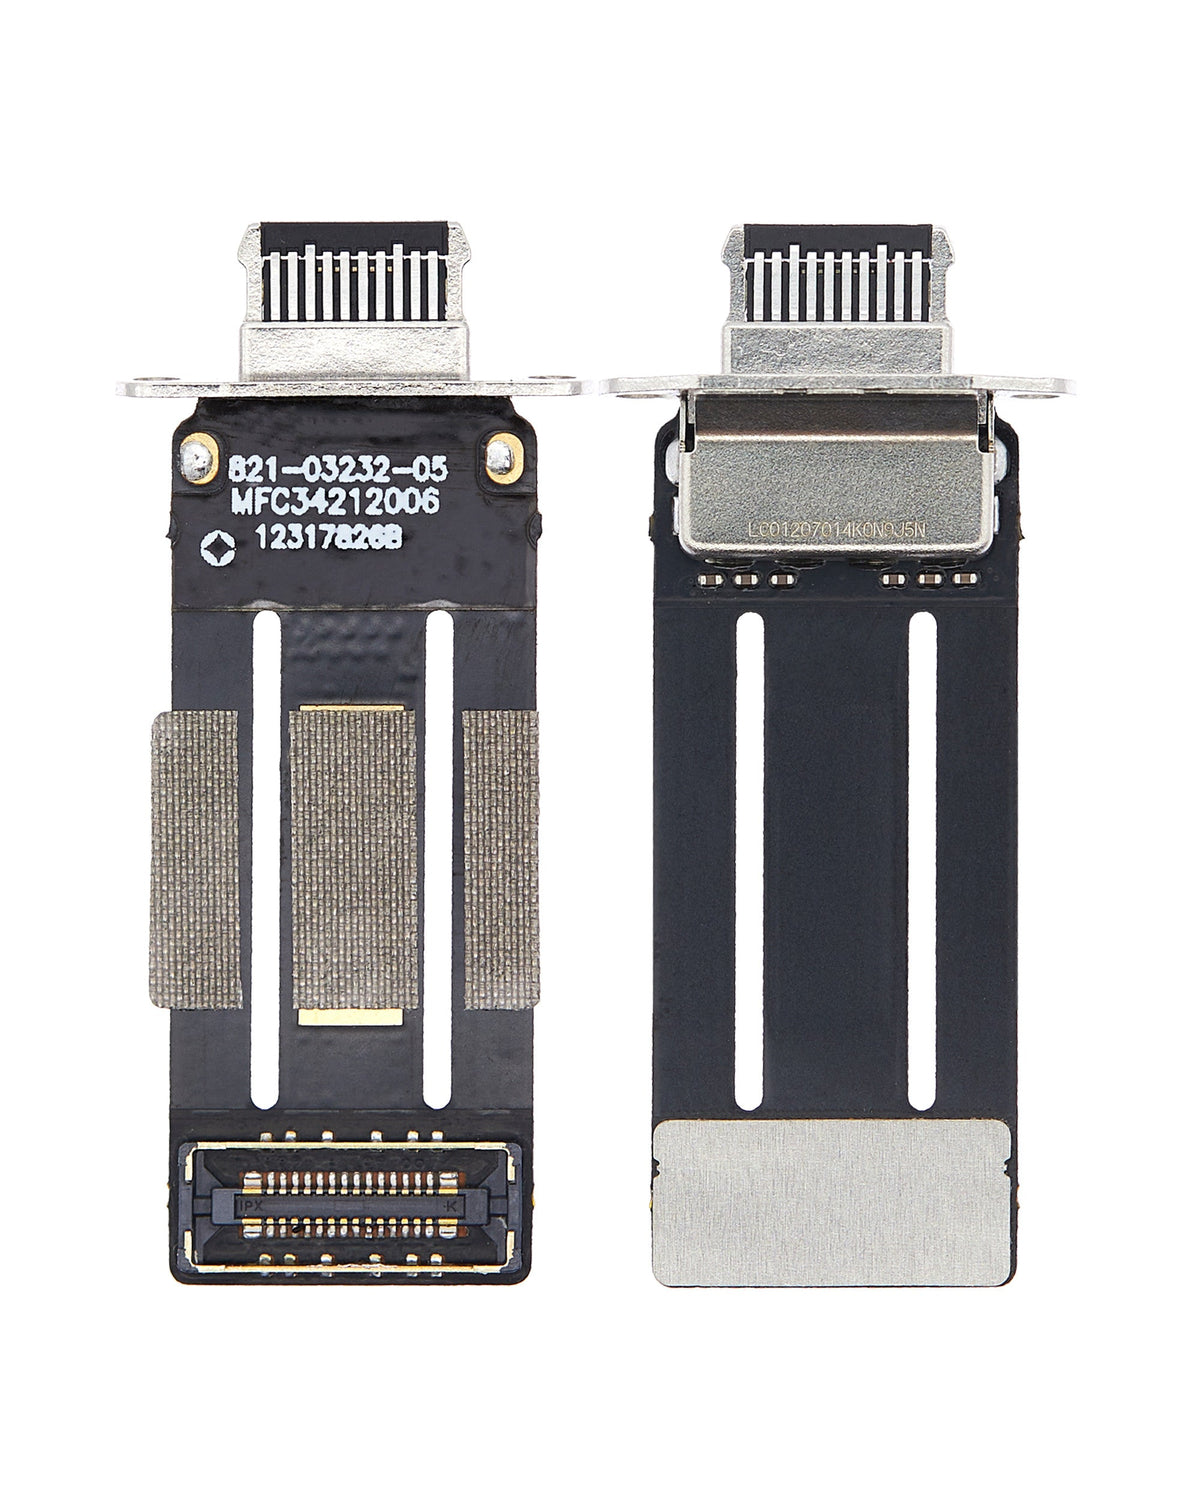 SPACE GRAY CHARGING PORT FLEX CABLE FOR IPAD MINI 6